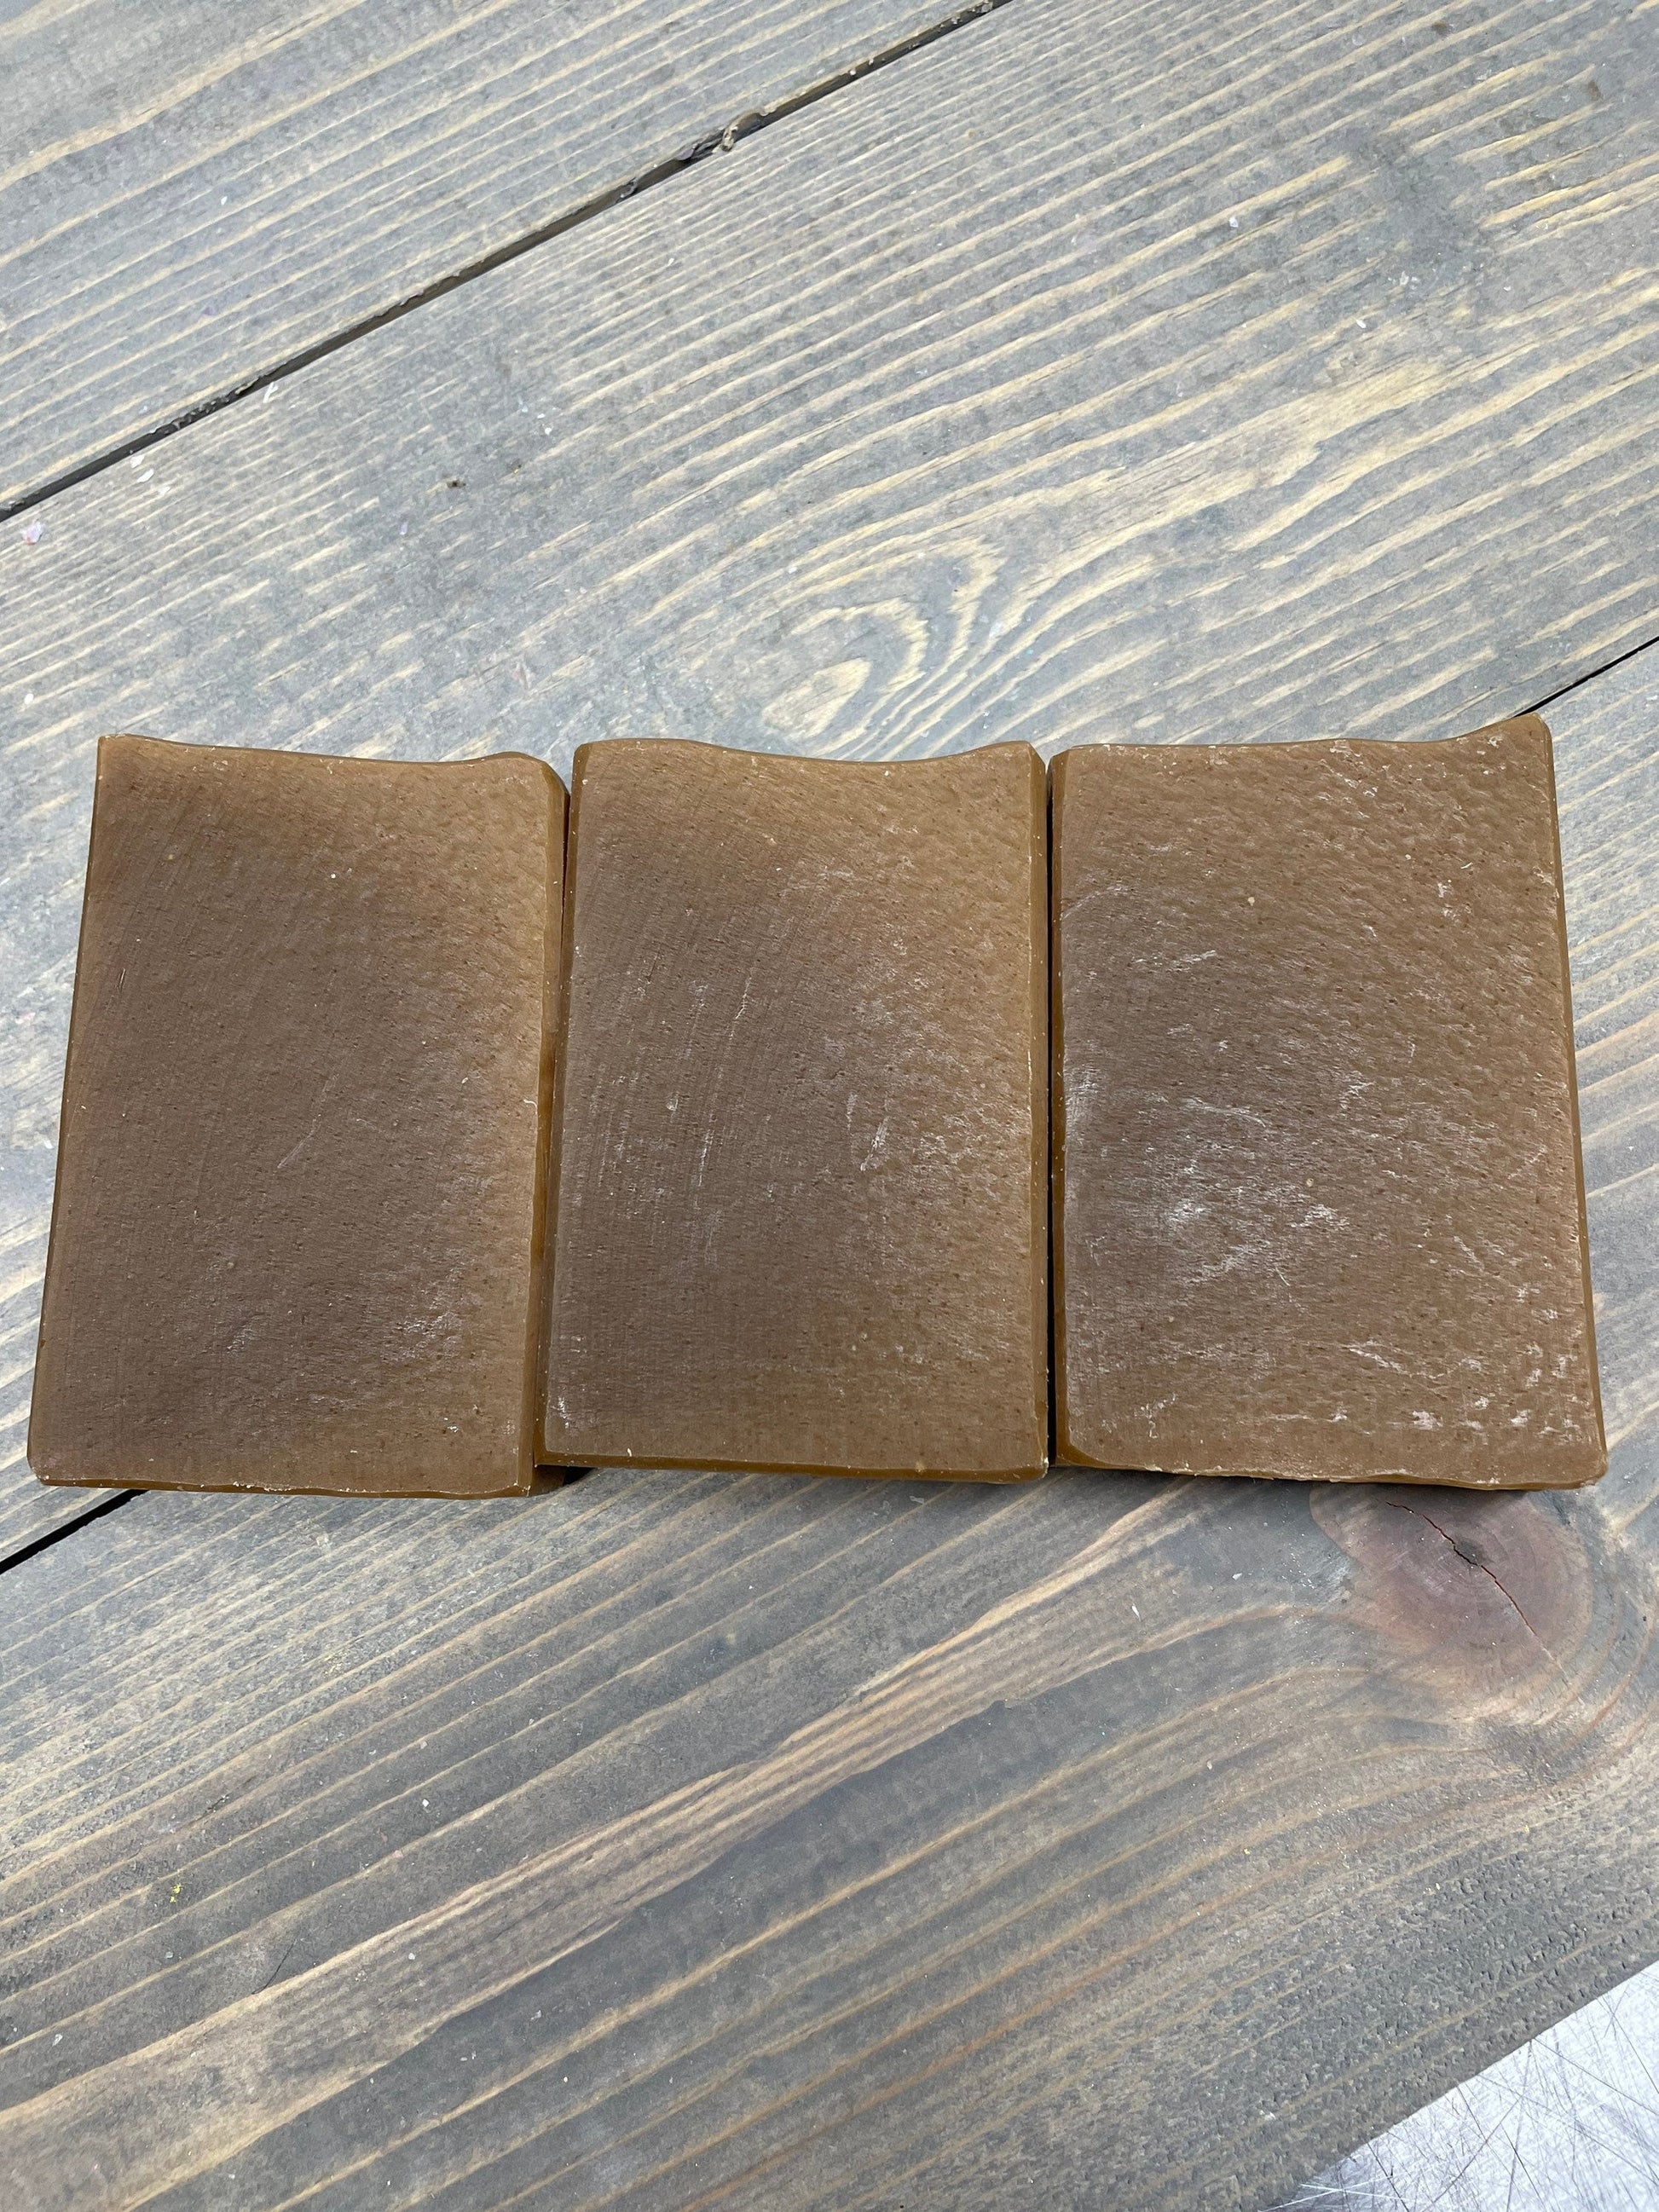 A photo showing detail of Pine Tar and Oatmeal Soap